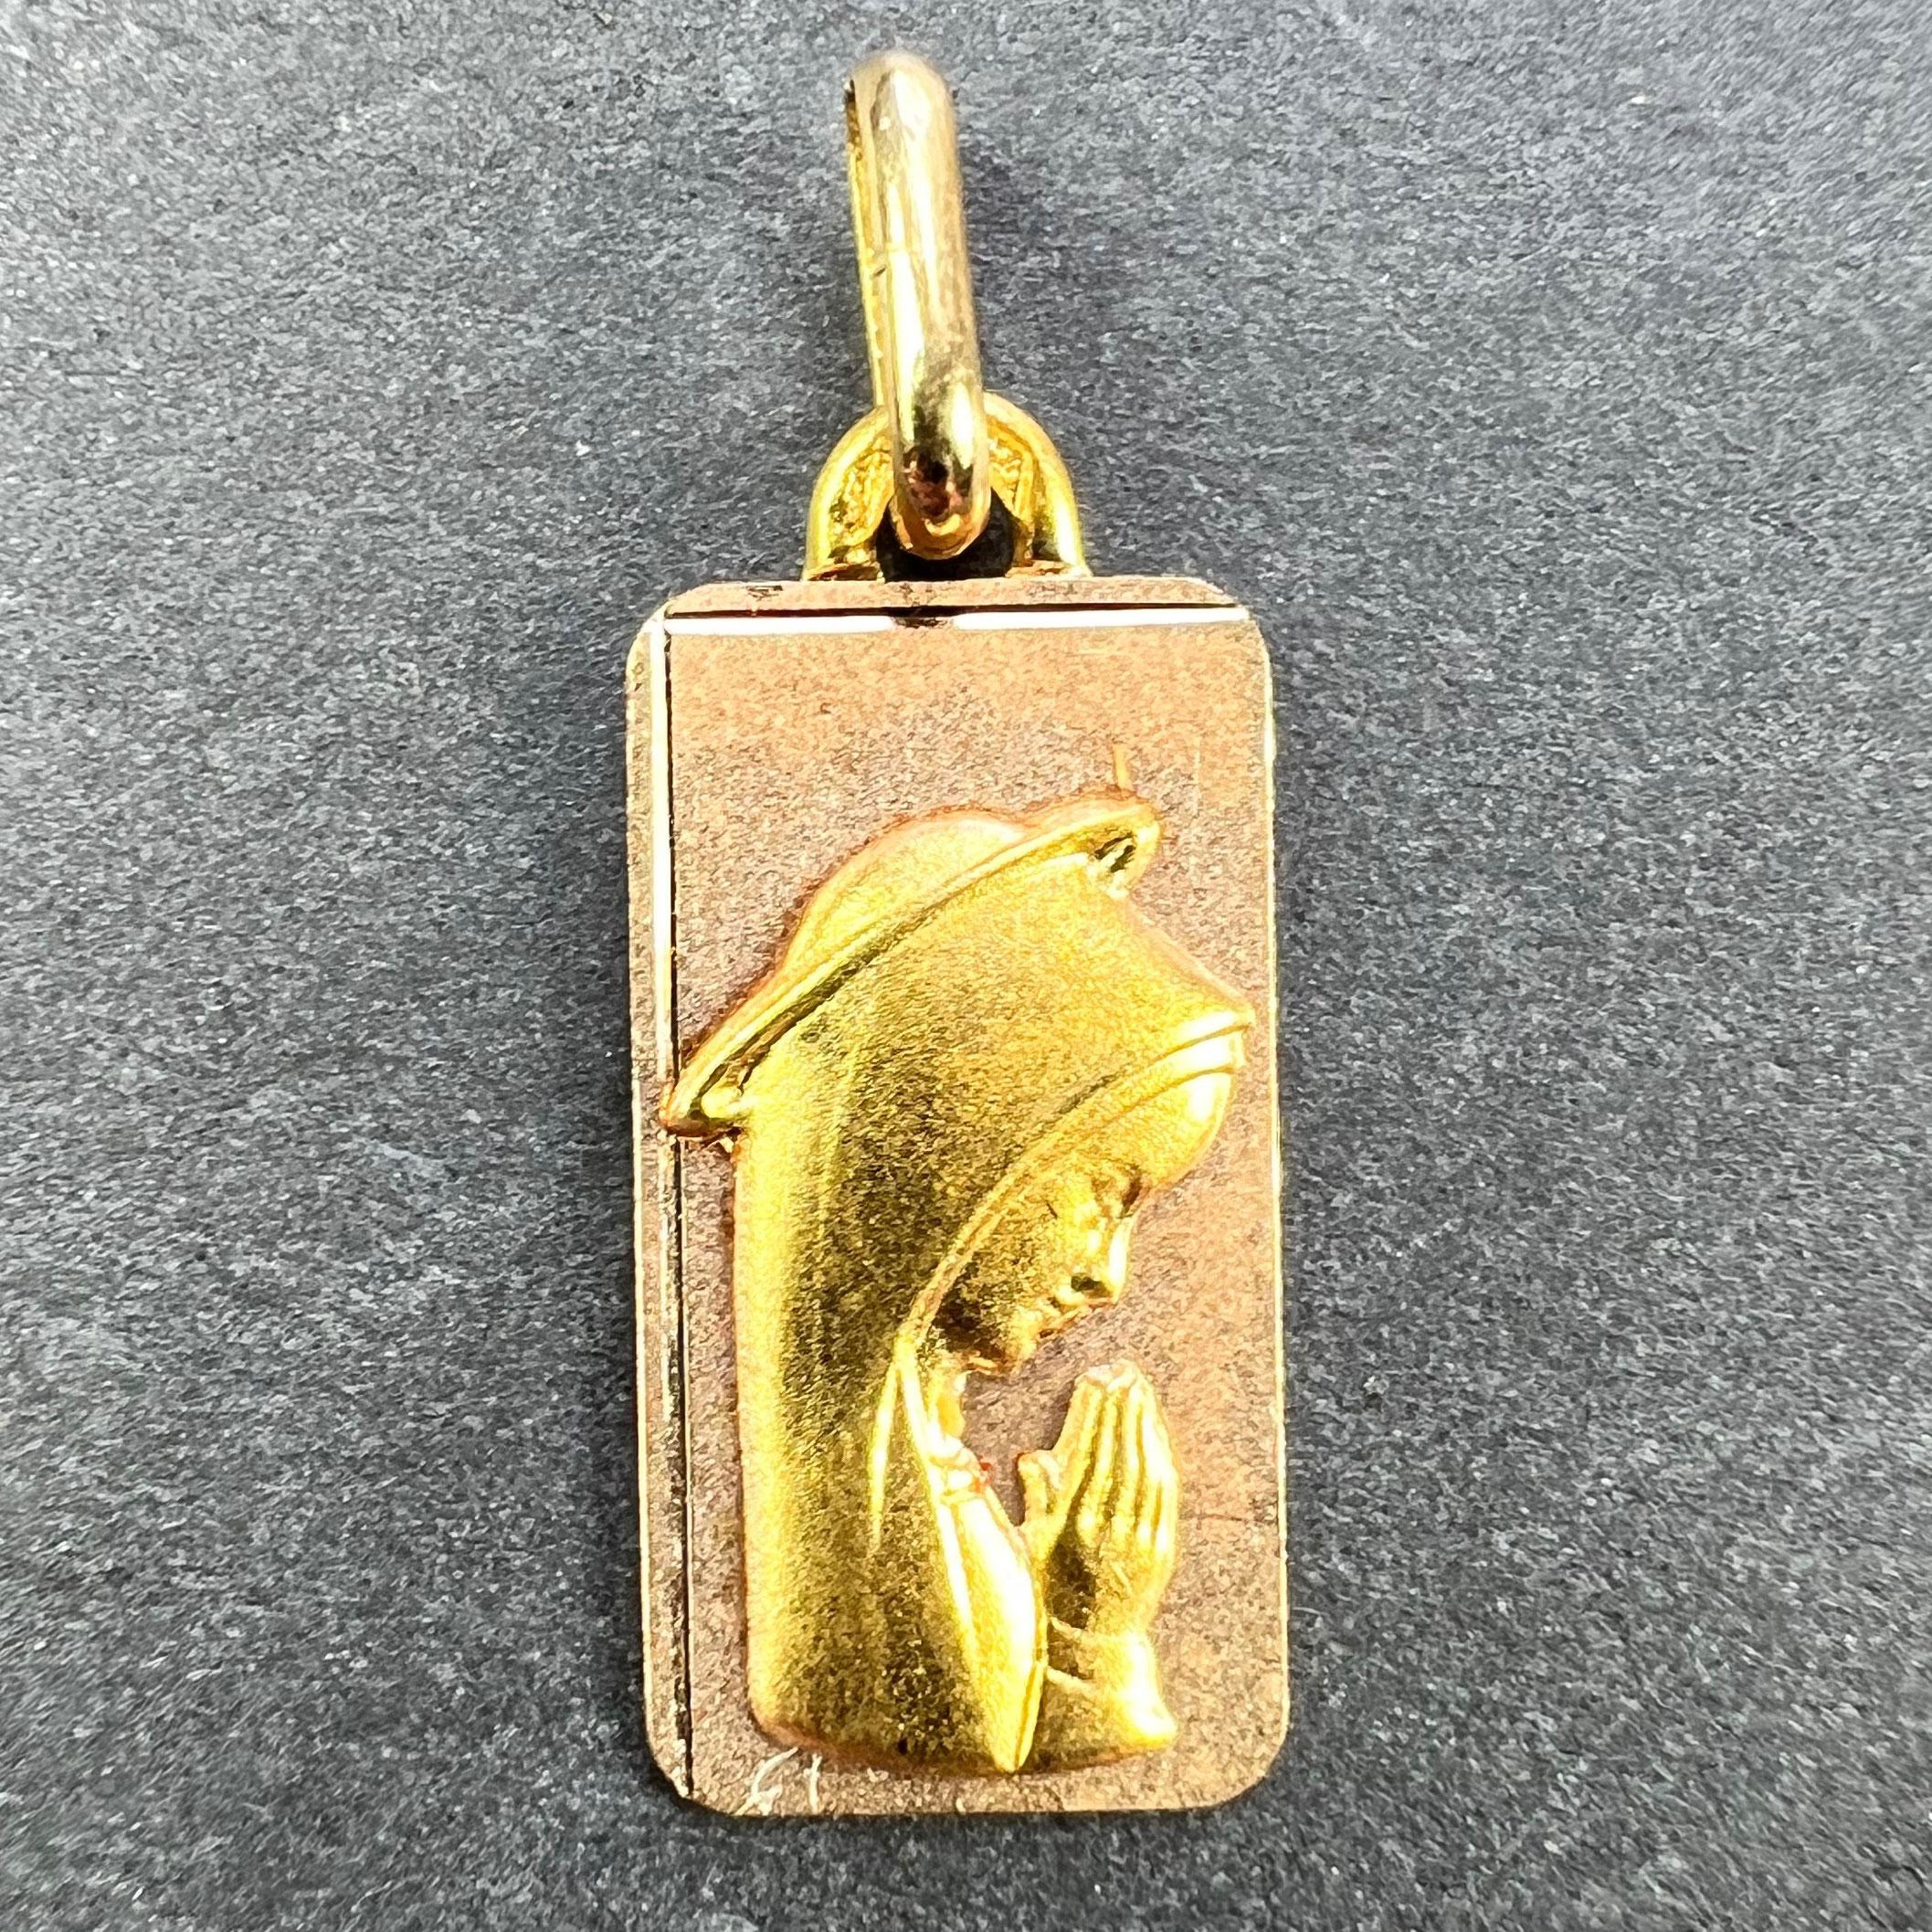 A French 18 karat (18K) yellow gold pendant designed as a rectangular medal depicting the Virgin Mary within a halo on a rose gold background. Marked with an A for Augis to the reverse of the pendant loop. Stamped with the eagle’s head for French